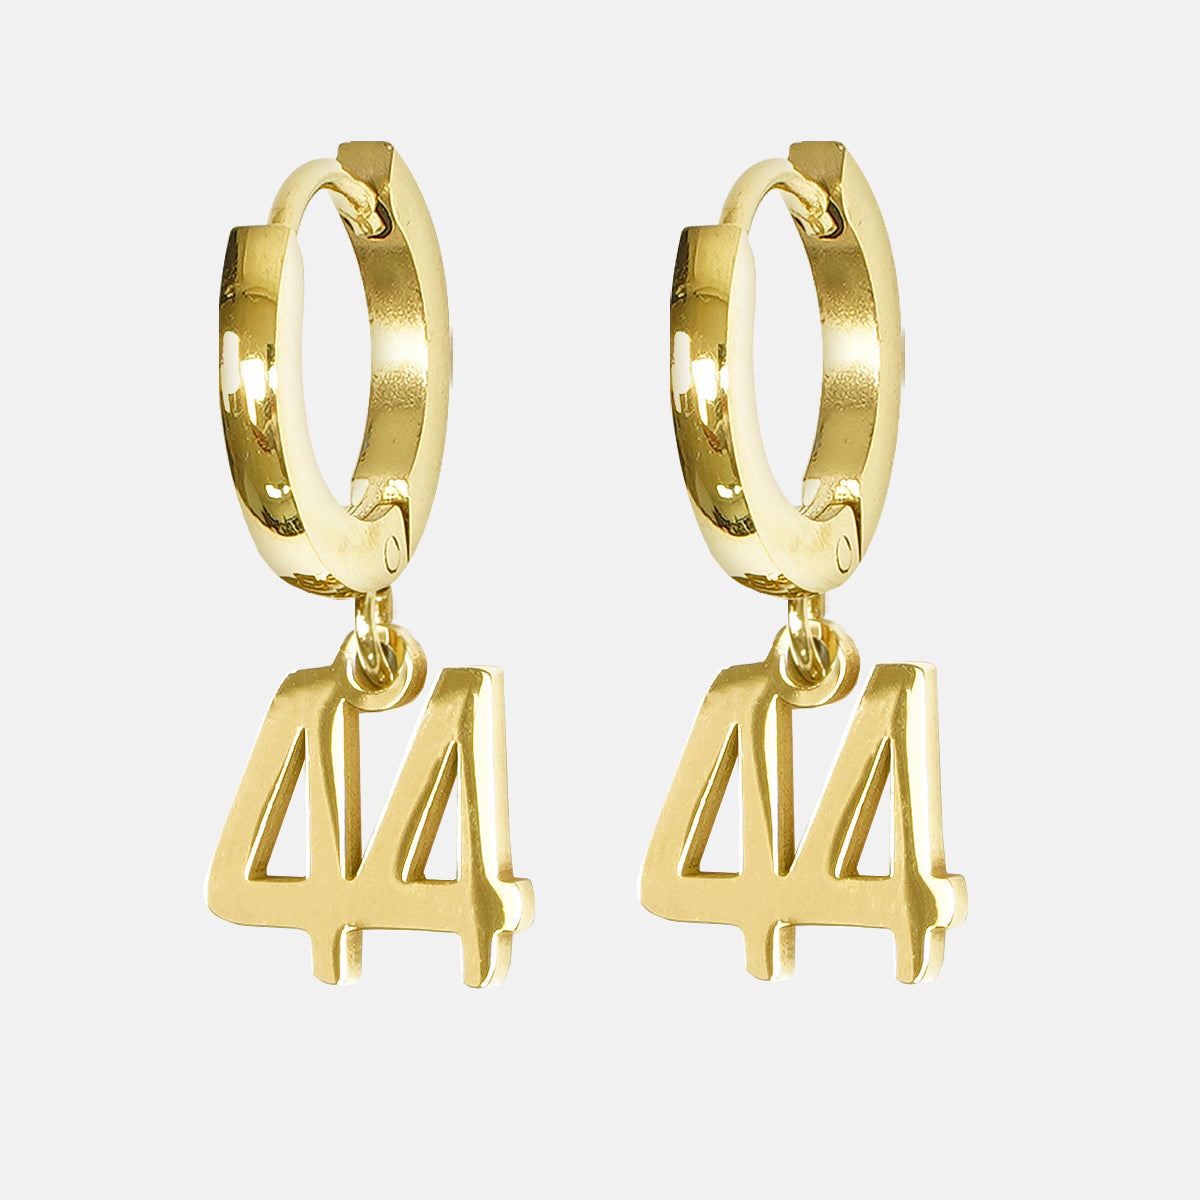 44 Number Earring - Gold Plated Stainless Steel